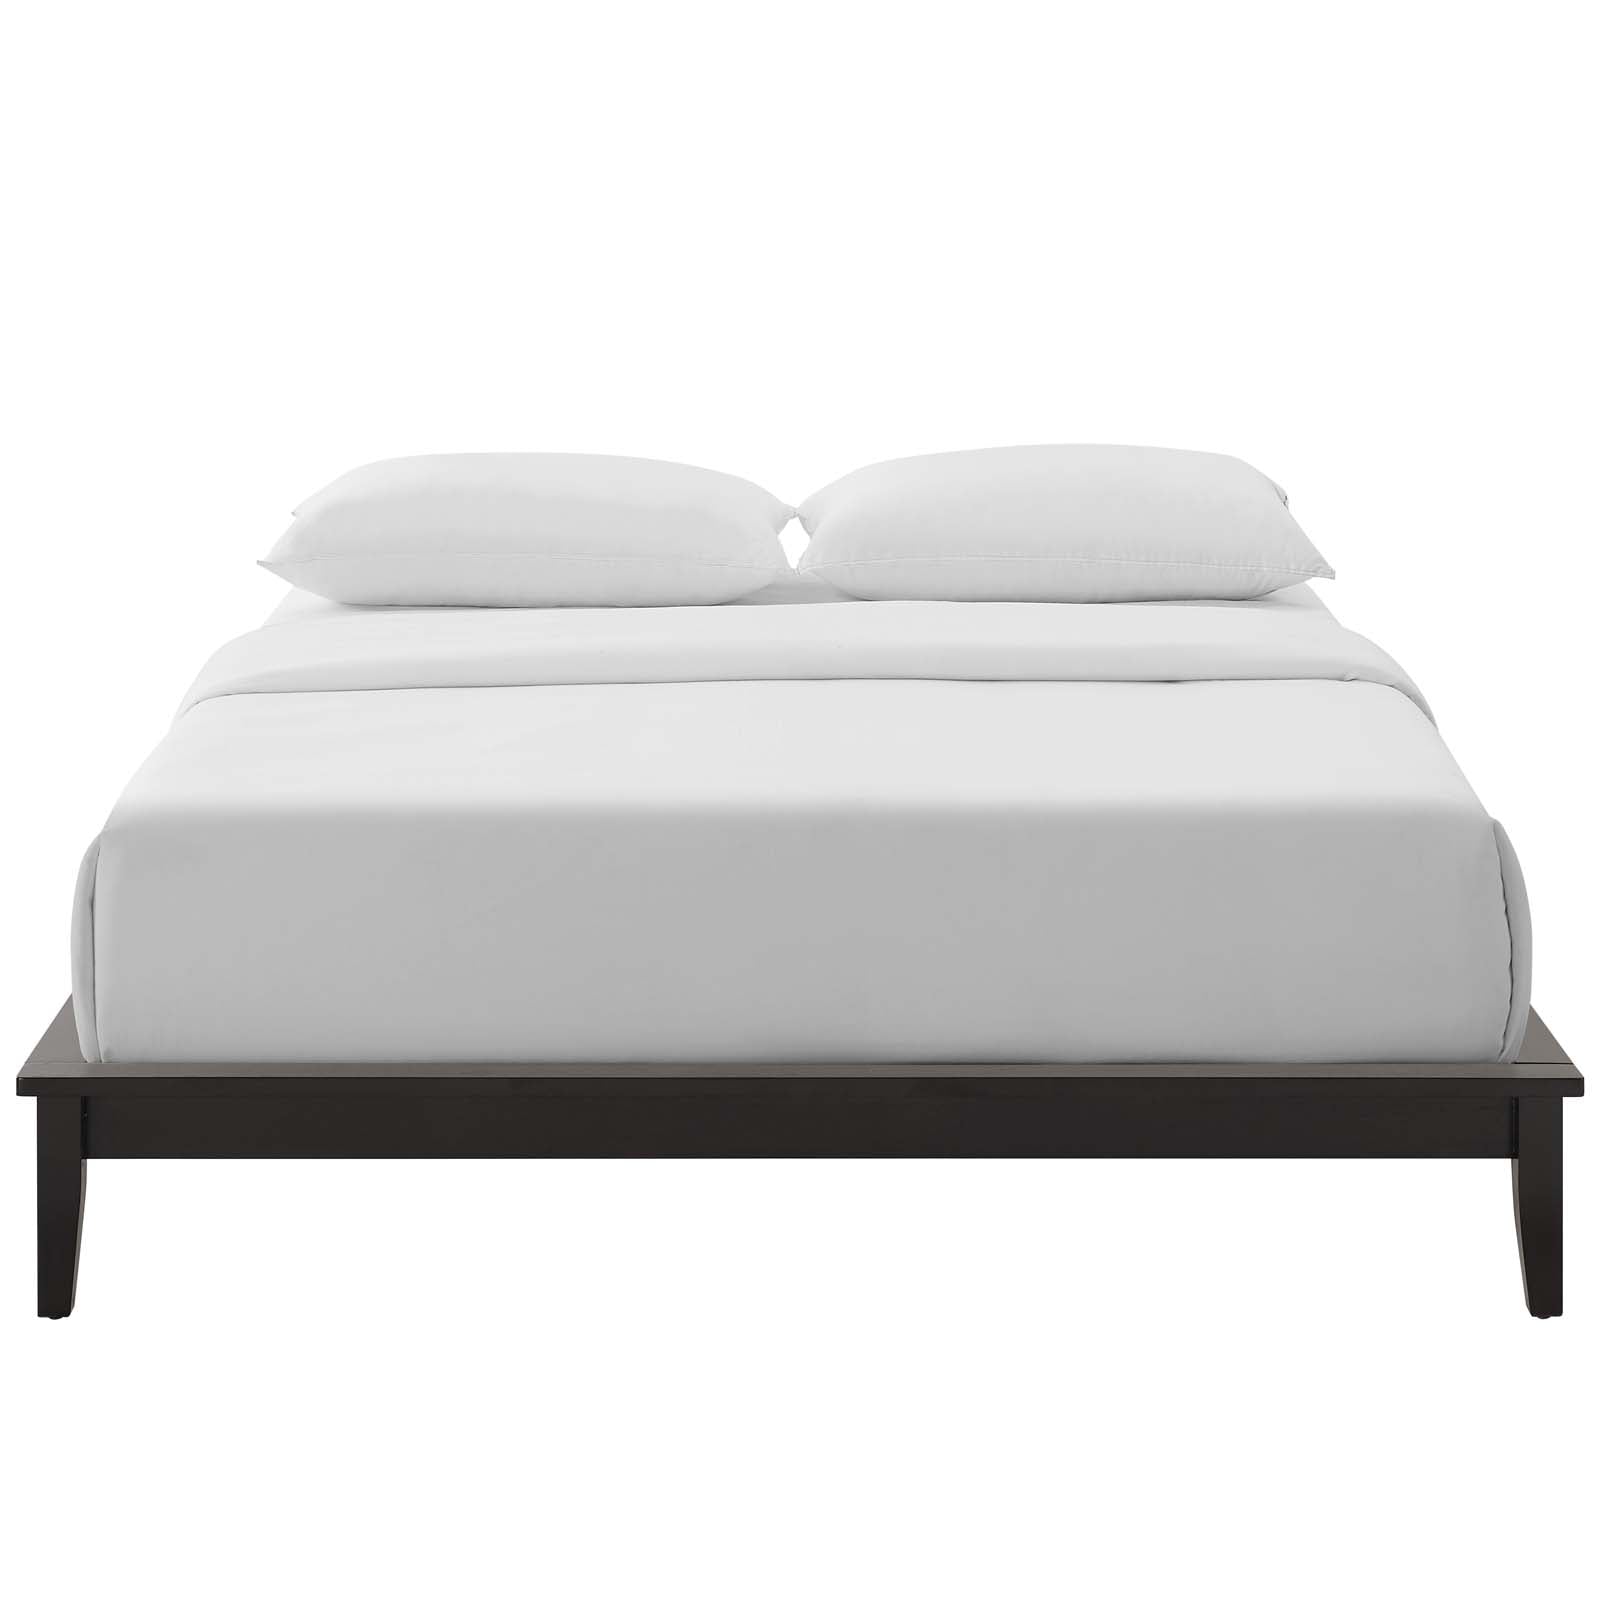 Modway Beds - Lodge Platform Queen Bed Frame Cappuccino